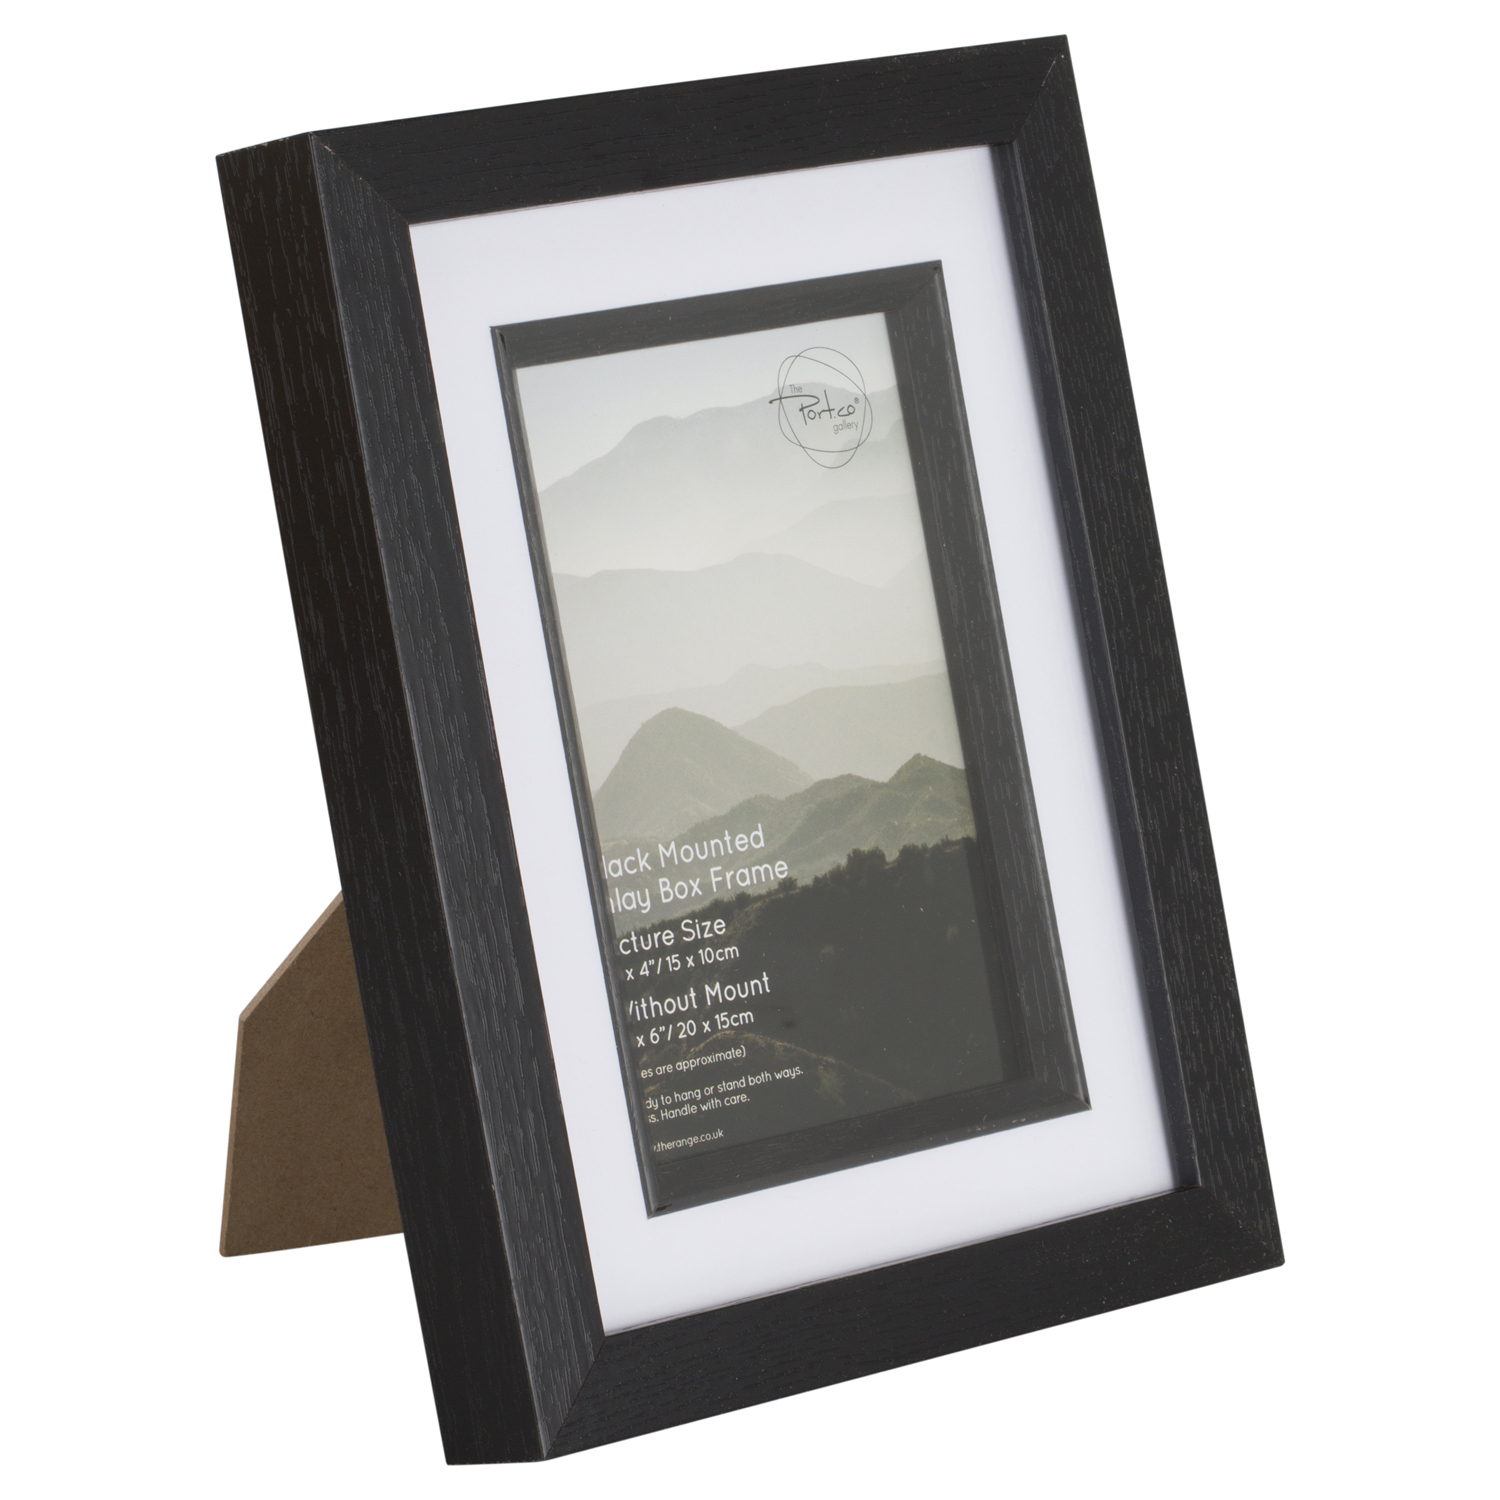 The Port Gallery Black Mounted Inlay Box Photo Frame 6 x 4 inch Image 2